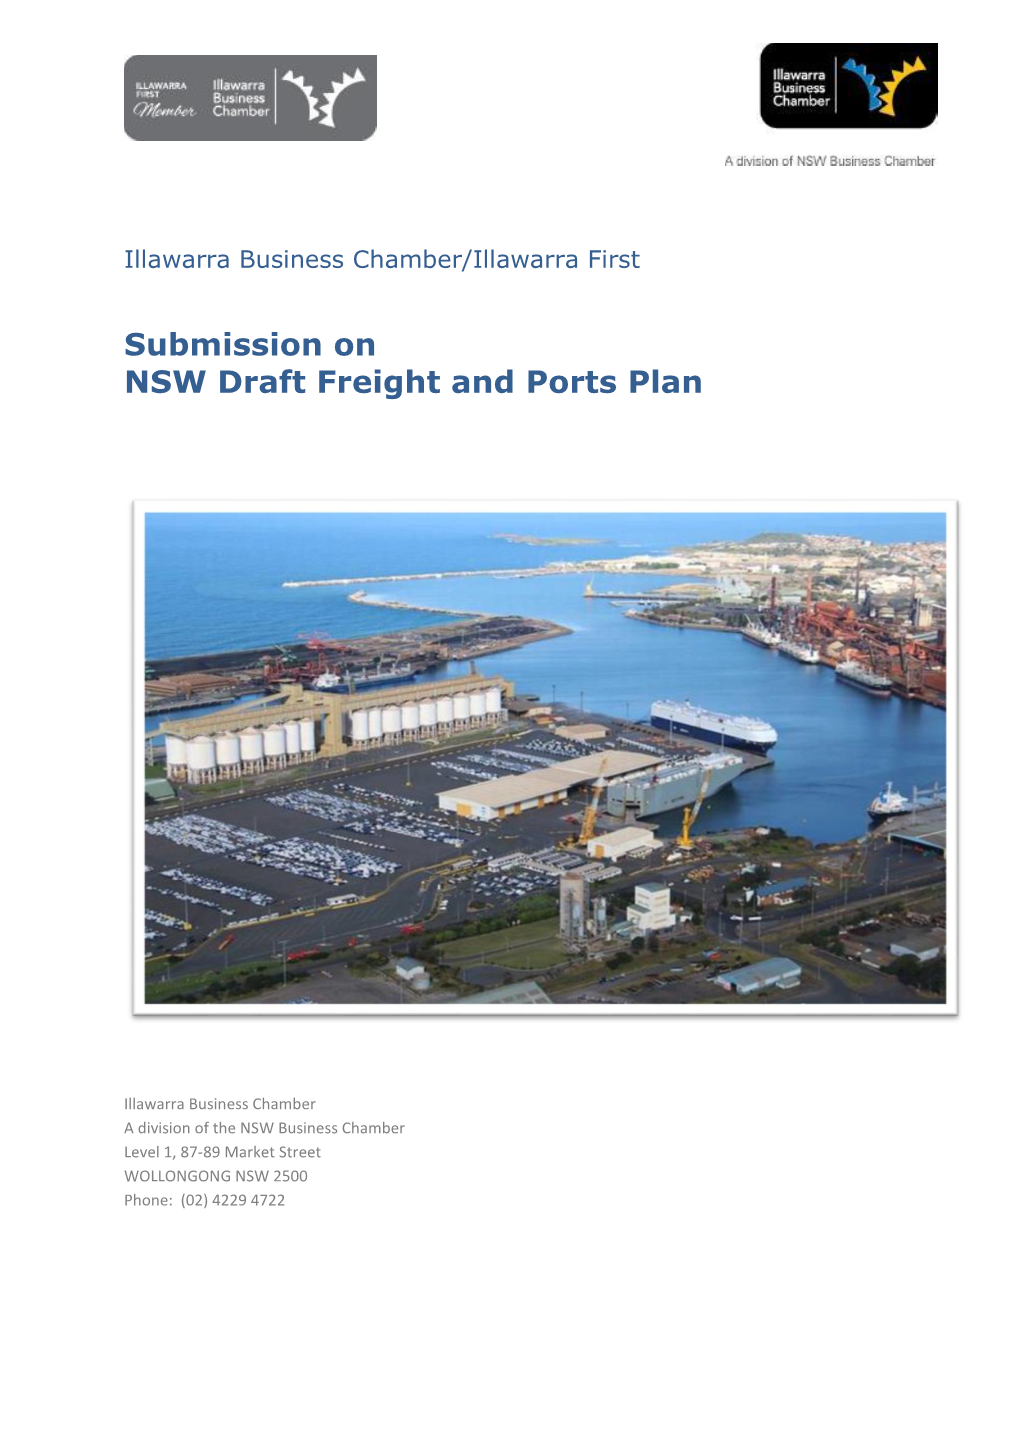 Submission on NSW Draft Freight and Ports Plan